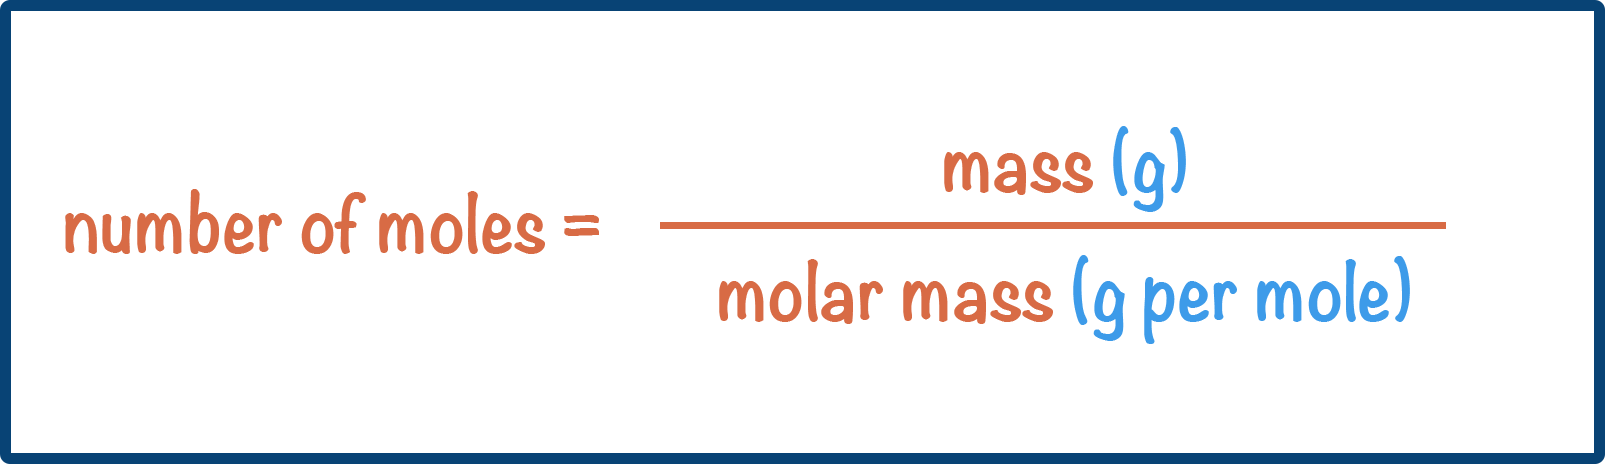 moles equation from mass and molar mass showing units